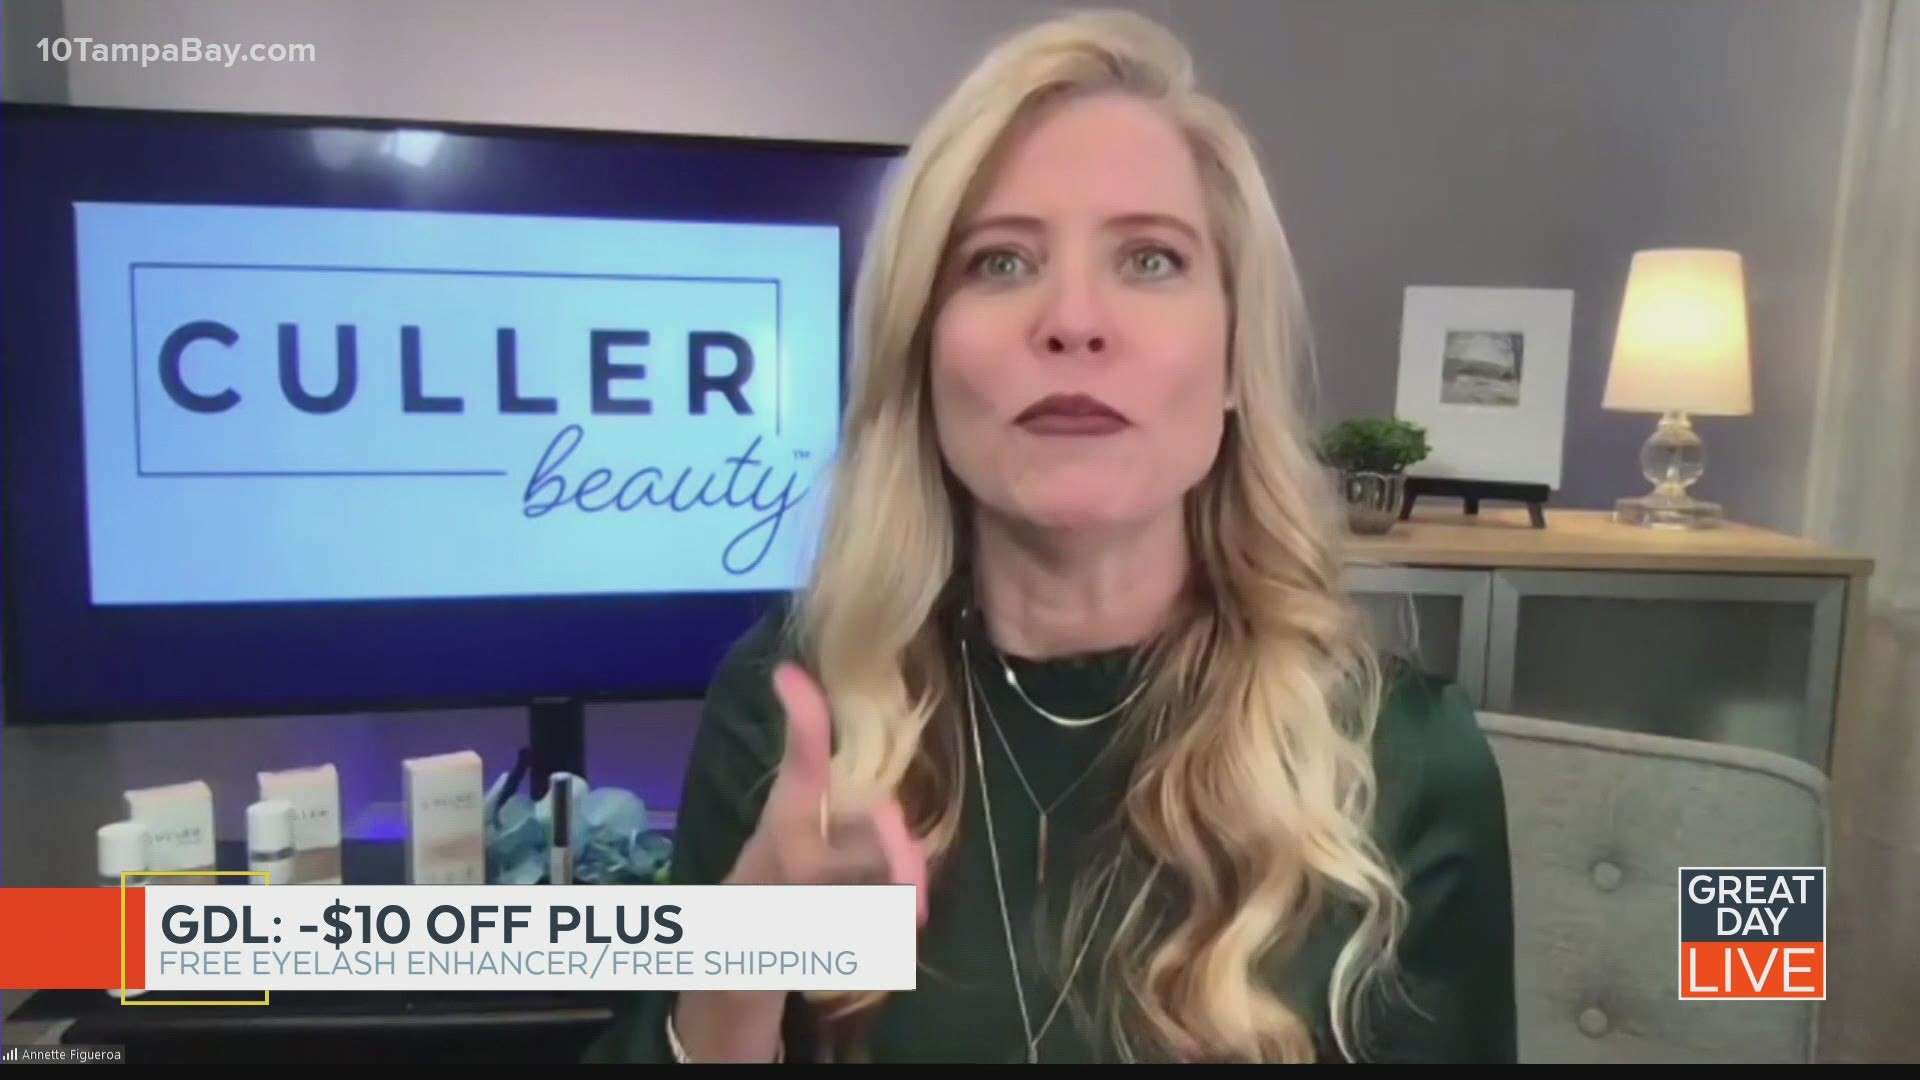 Paid content sponsored by Culler Beauty